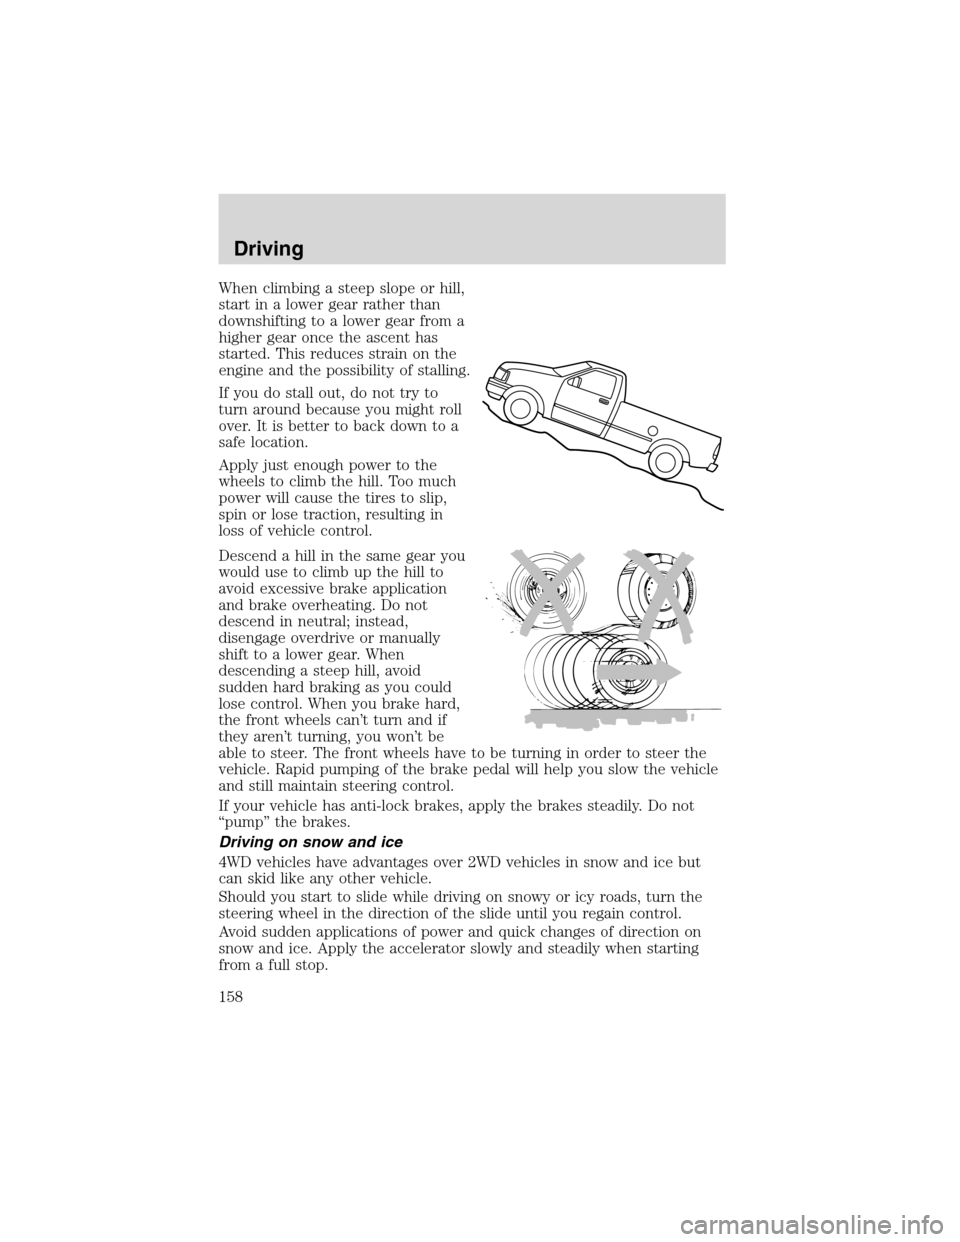 LINCOLN BLACKWOOD 2003  Owners Manual When climbing a steep slope or hill,
start in a lower gear rather than
downshifting to a lower gear from a
higher gear once the ascent has
started. This reduces strain on the
engine and the possibilit